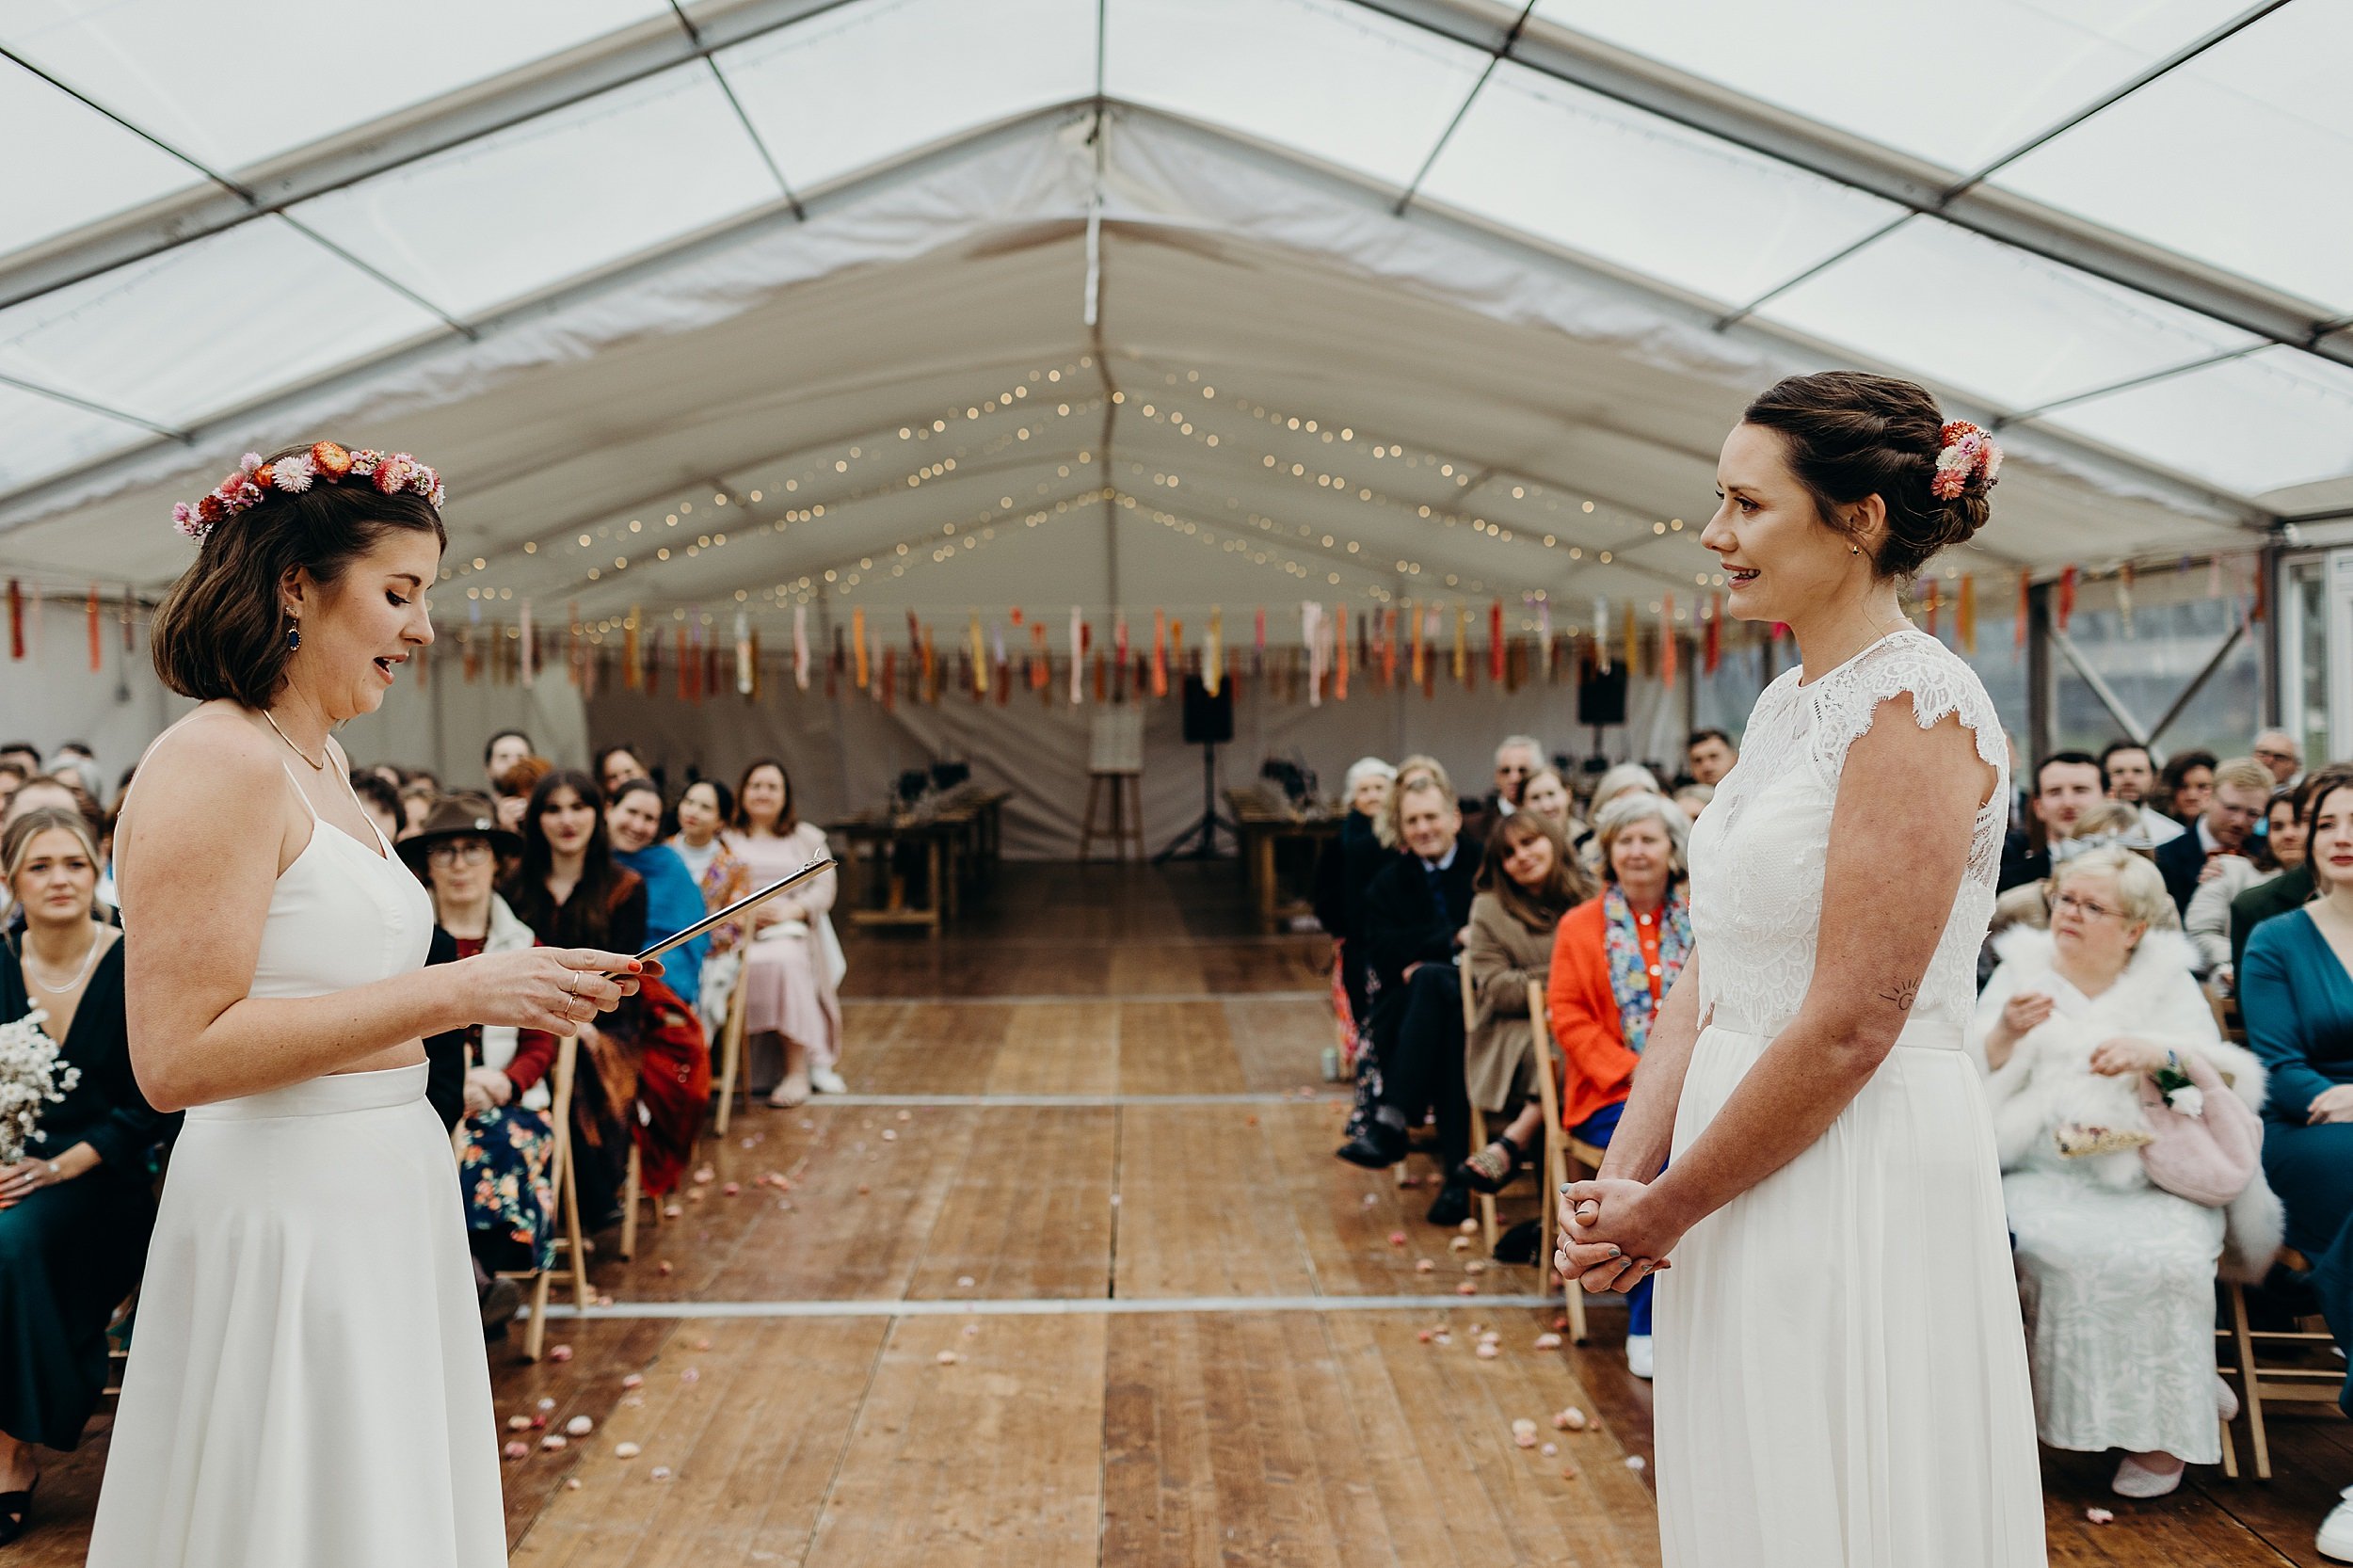 one bride reads as the other listens during their harvest moon wedding inside a white marquee as seated guests look on beneath festoon lights and ribbon garlands